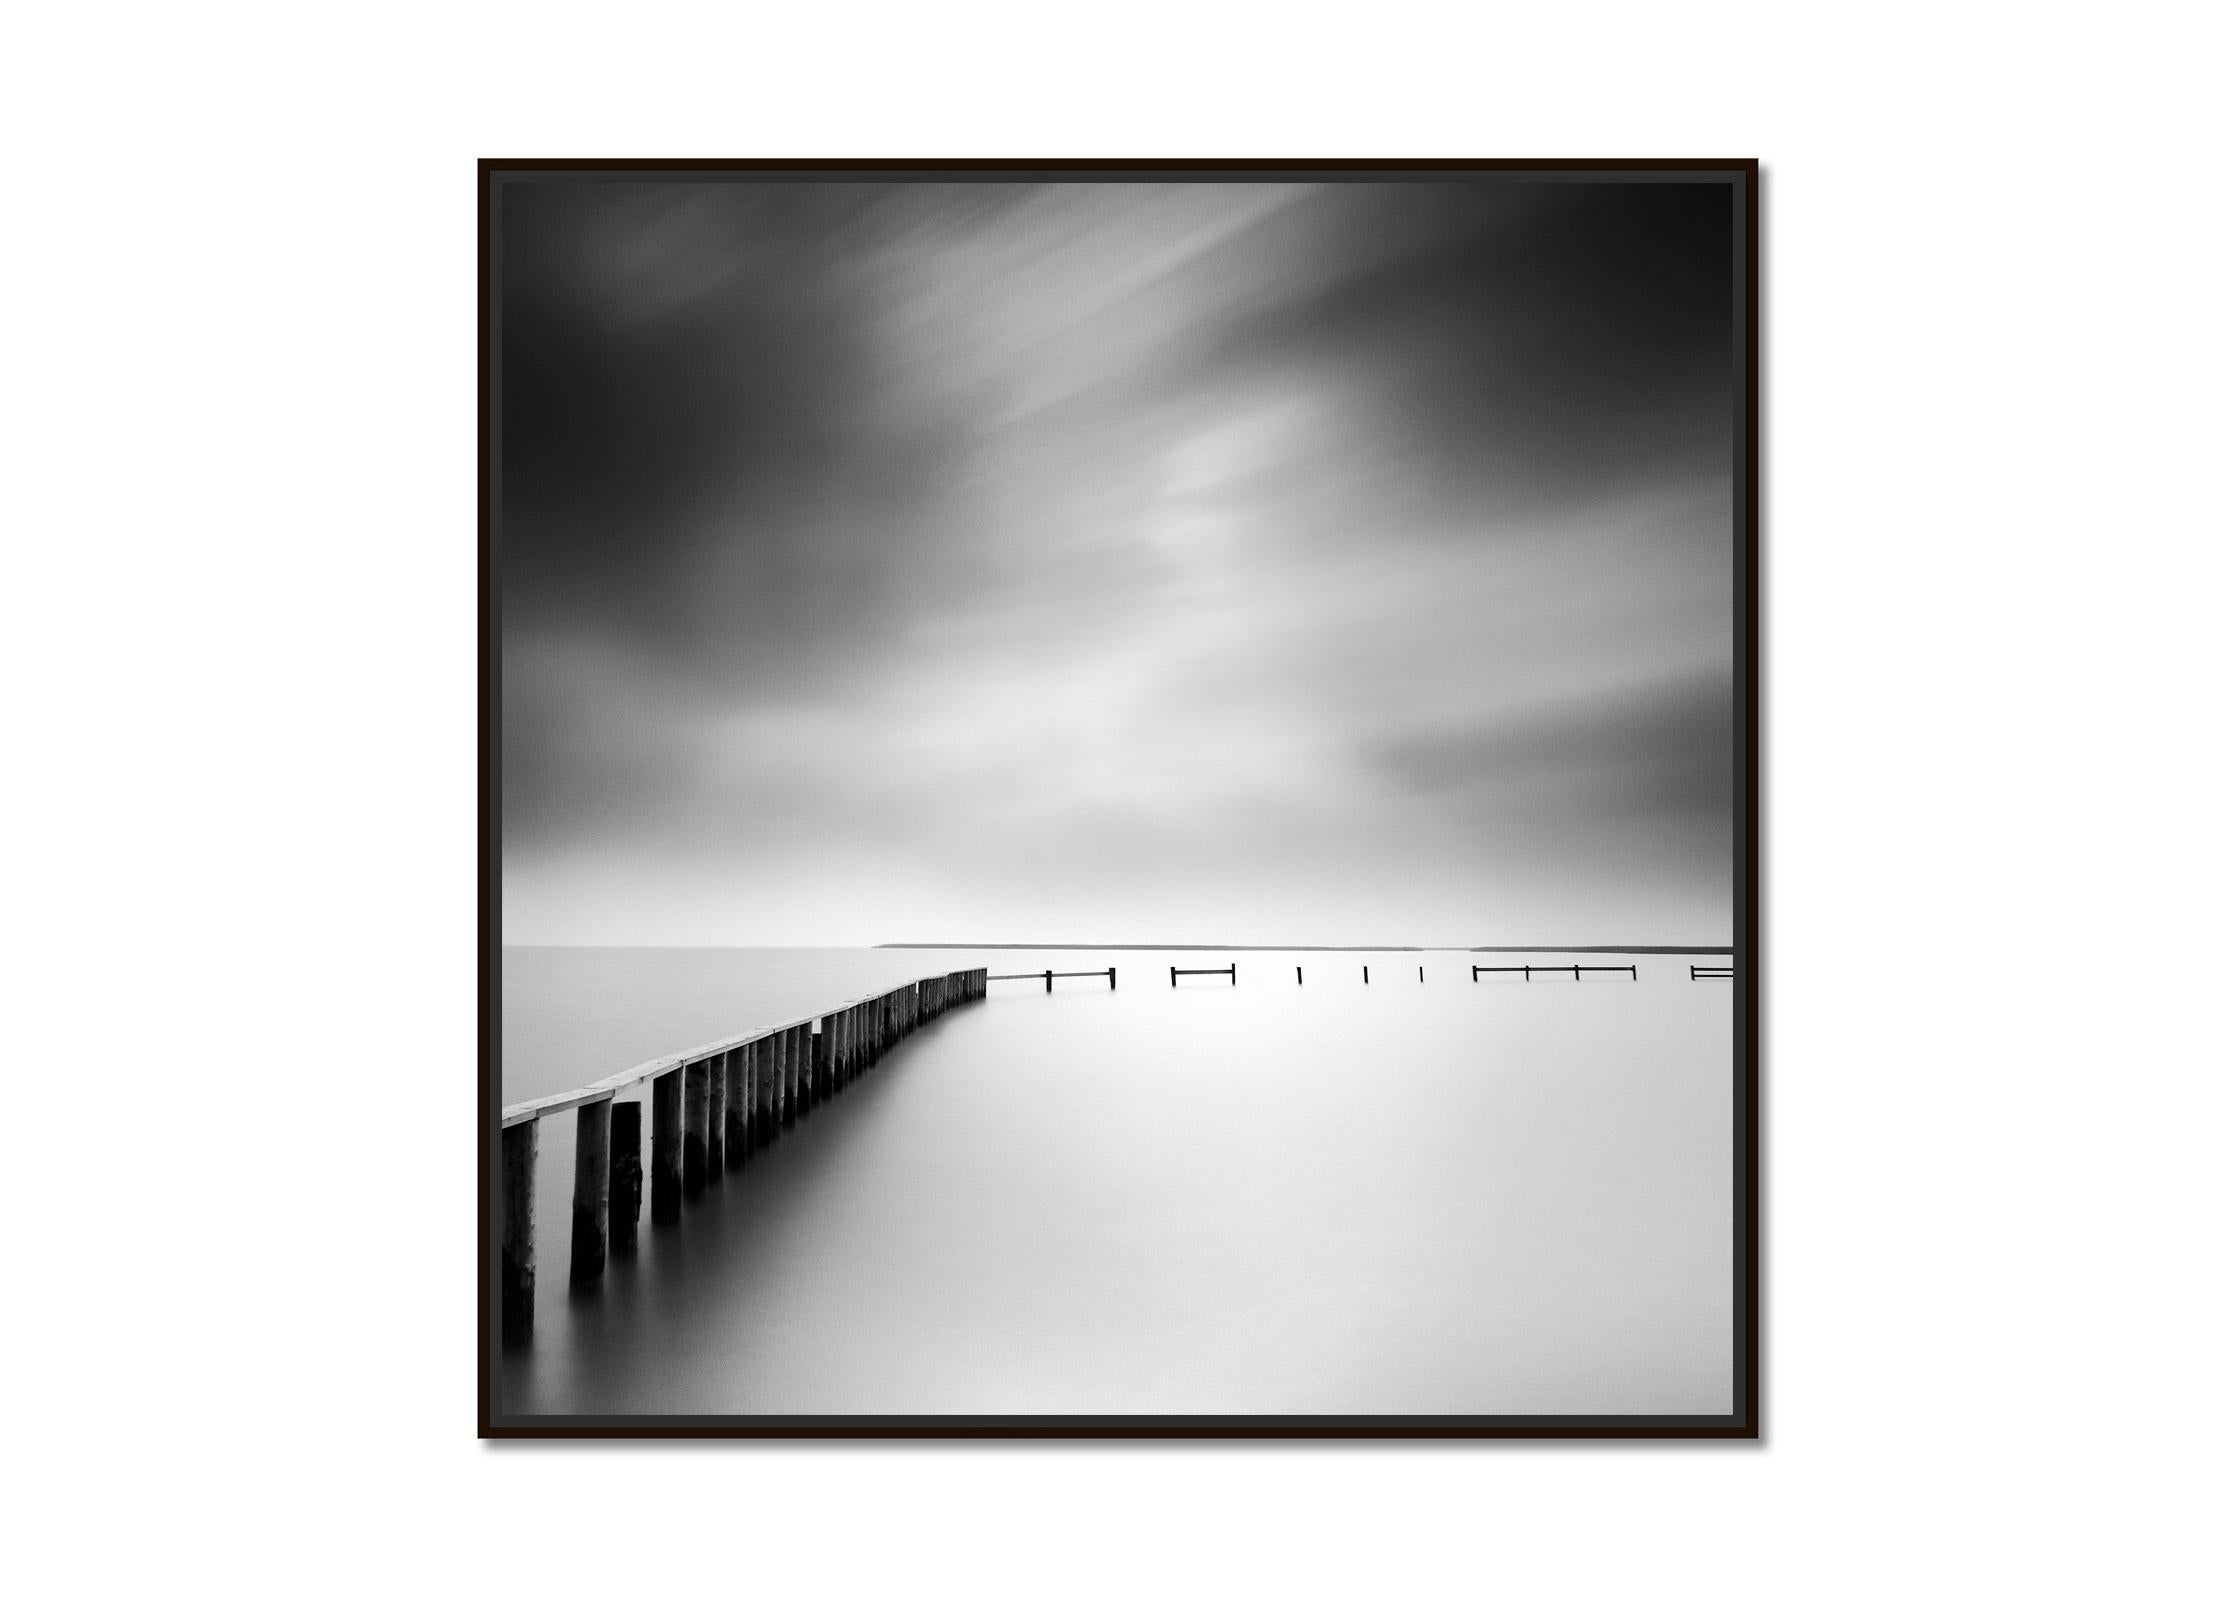 Swimming Area, long exposure waterscape, black and white landscape photography - Photograph de Gerald Berghammer